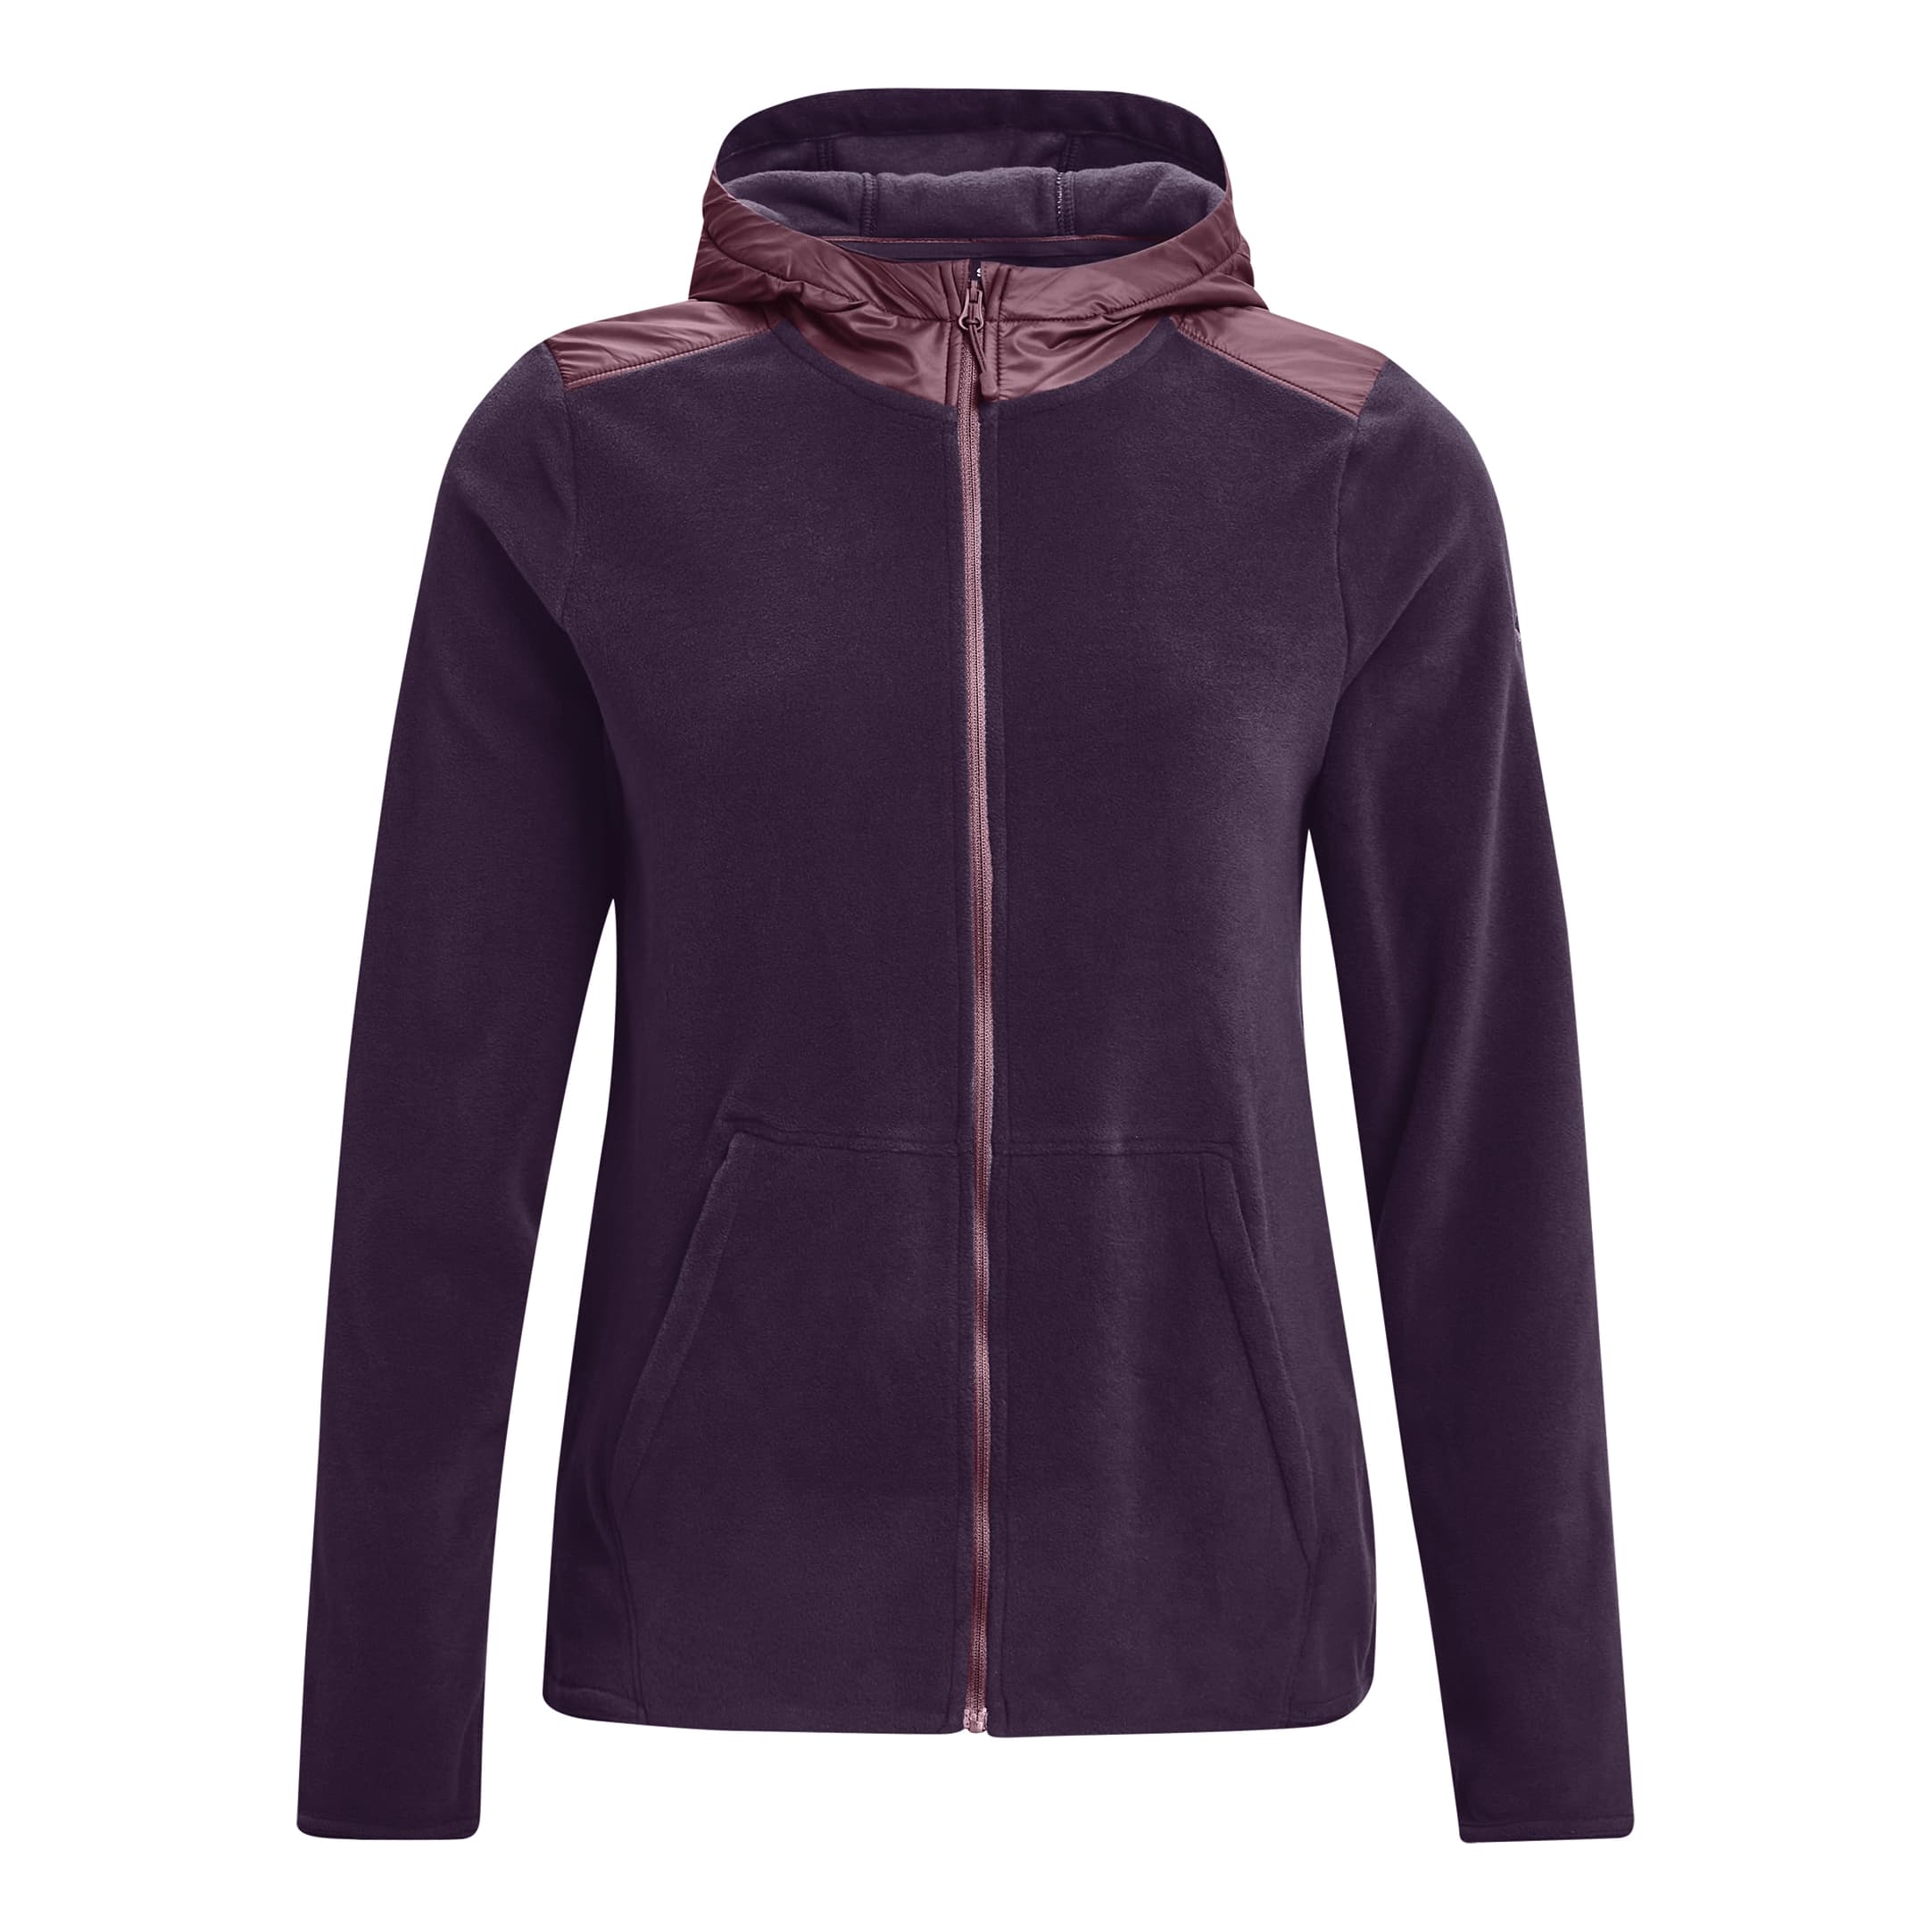 Under Armour® Women’s Polartec Forge Full-Zip Hoodie - Cyclone